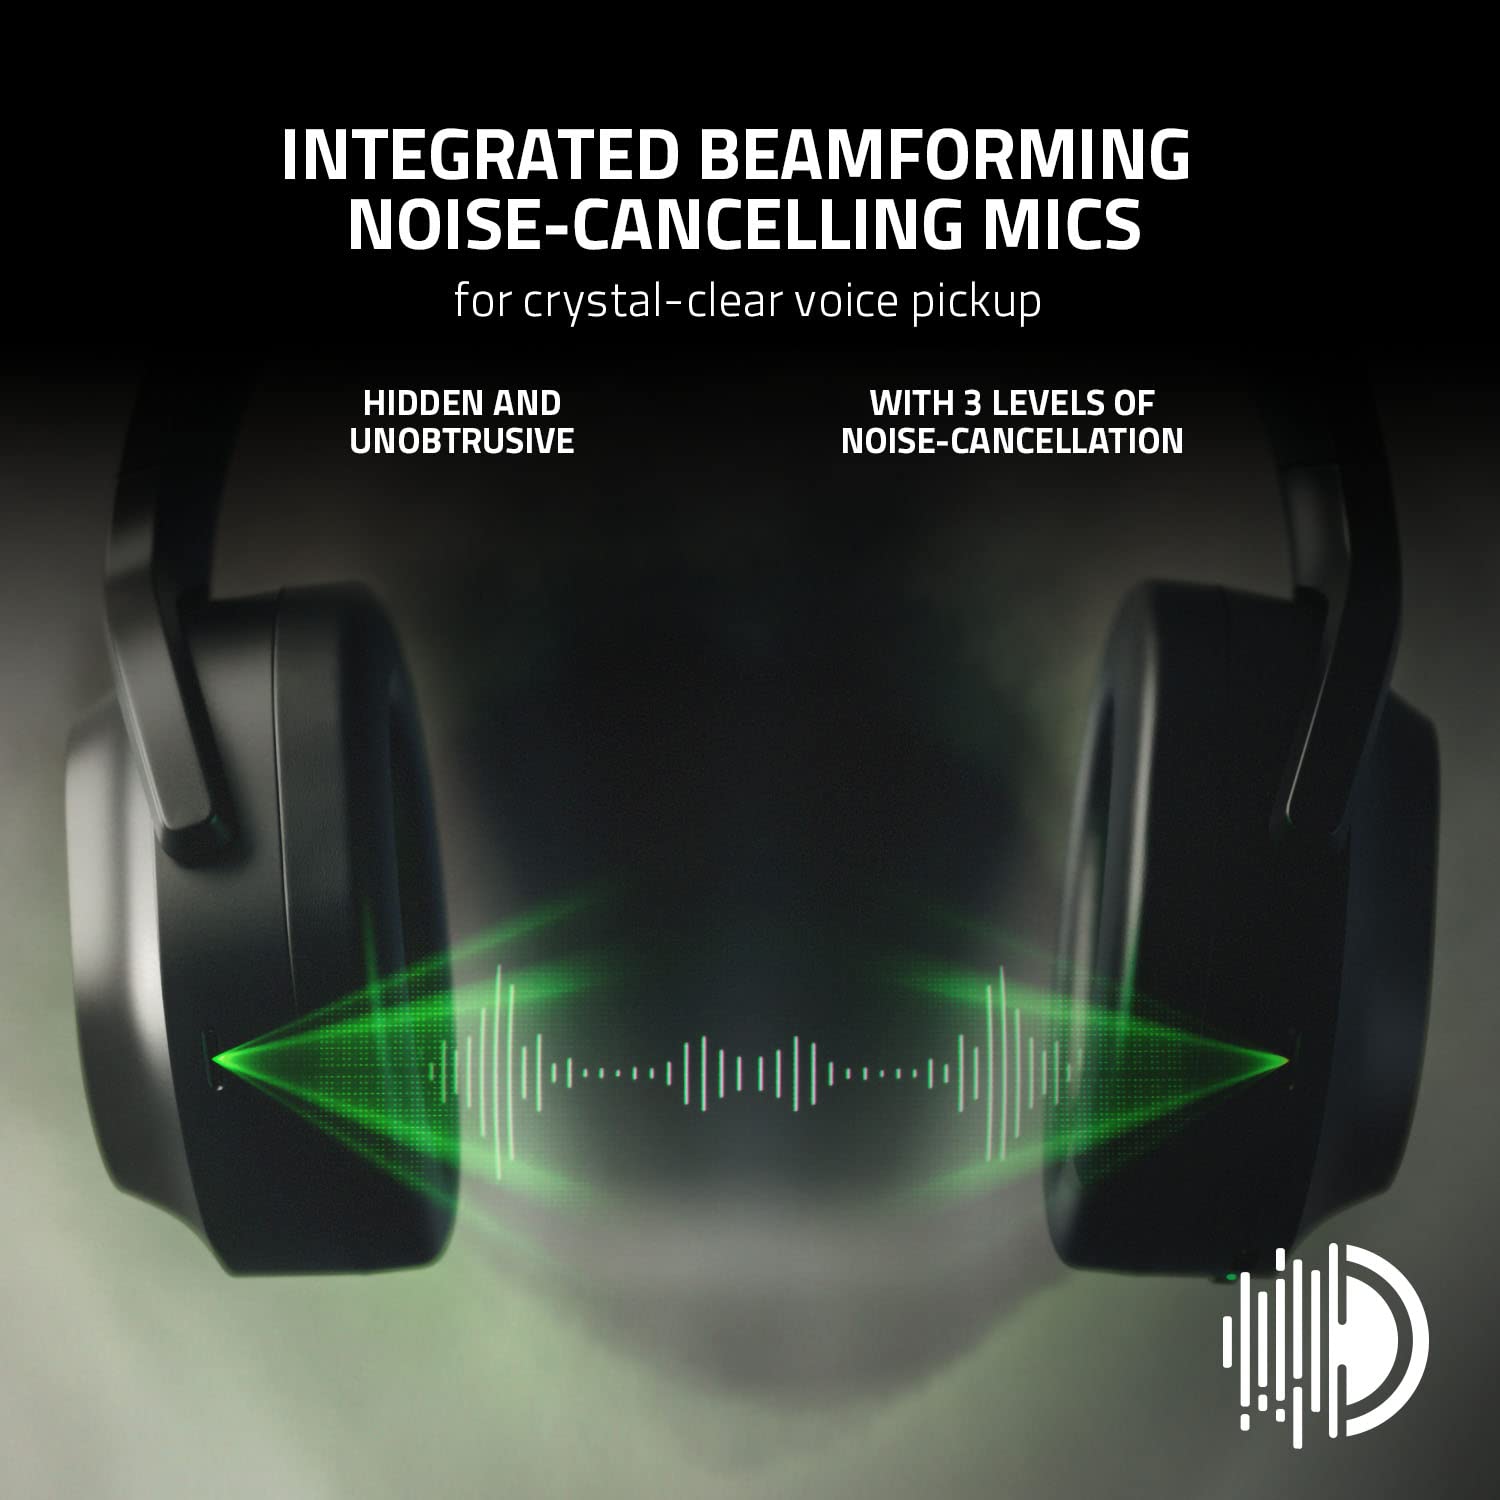 Razer Barracuda Pro Wireless Gaming & Mobile Headset (PC, PlayStation, Switch, Android, iOS): Hybrid ANC - 2.4GHz Wireless + Bluetooth - THX AAA - 50mm Drivers - Integrated Mic - 40 Hr Battery - Black